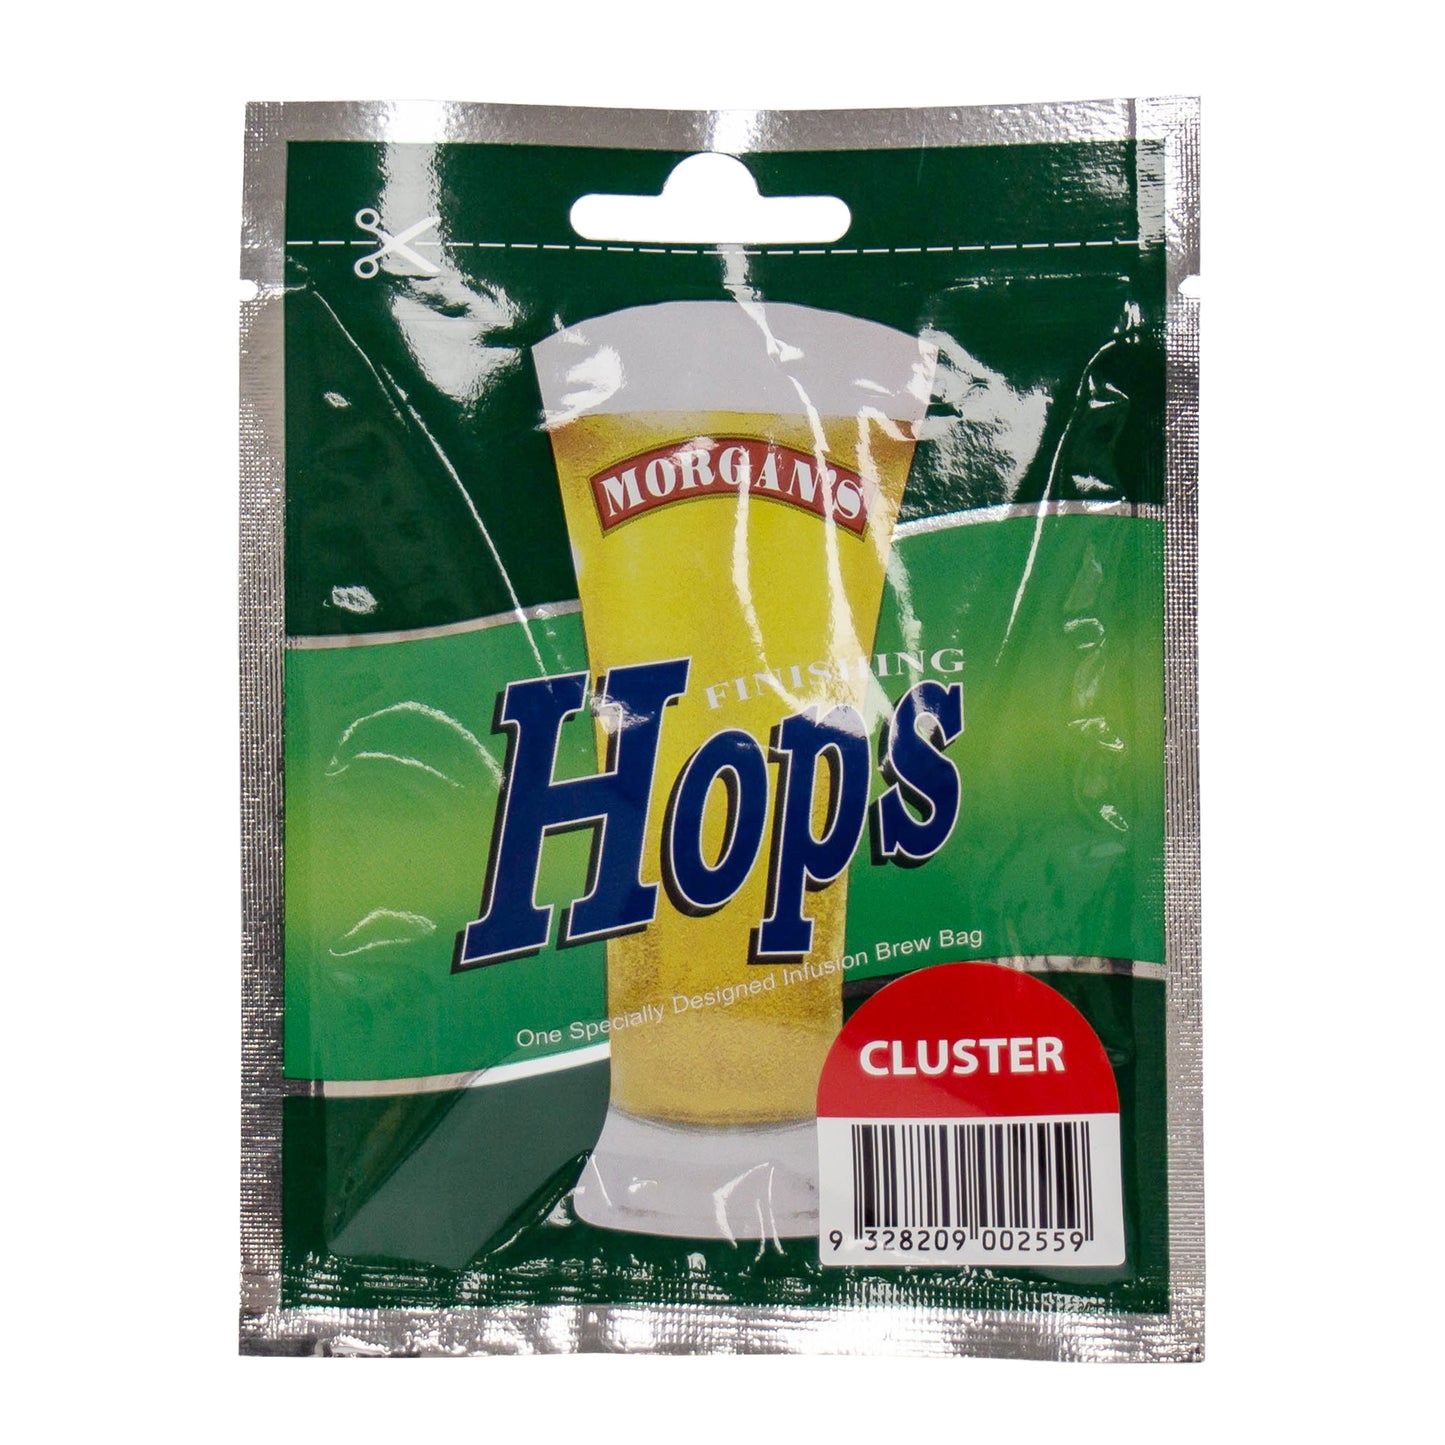 12g packet of Cluster Hops for home brewing